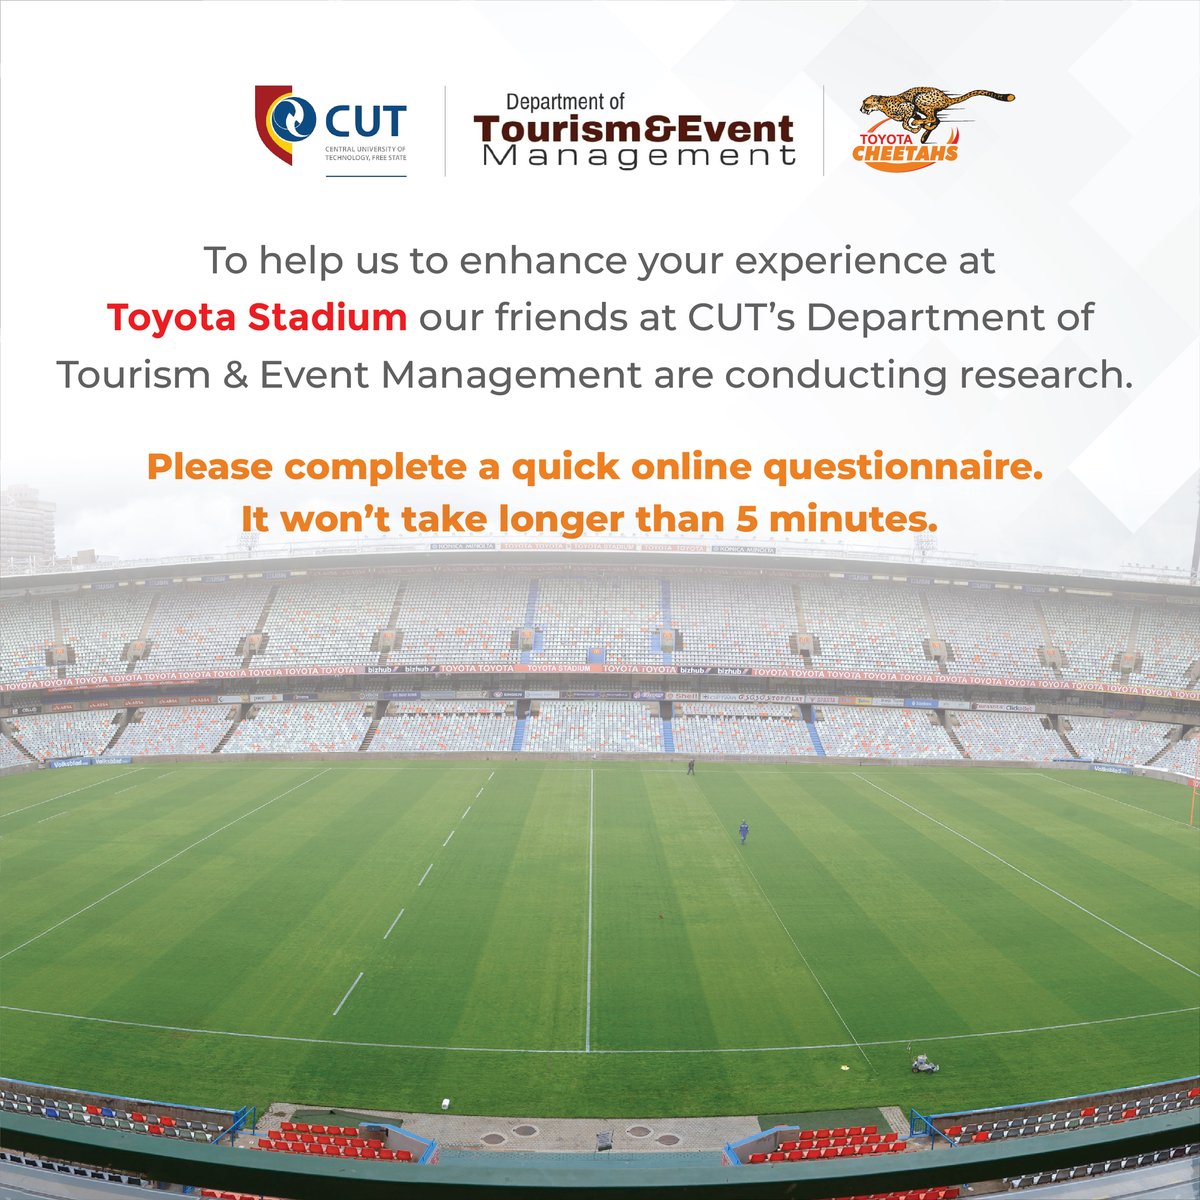 To help us enhance your experience at Toyota Stadium, our friends at CUT’s Department of Tourism & Event Management are conducting research. Please complete a quick online questionnaire. It won’t take longer than 5 minutes. questionpro.com/t/AQiRdZ2hg5 @ToyotaSA